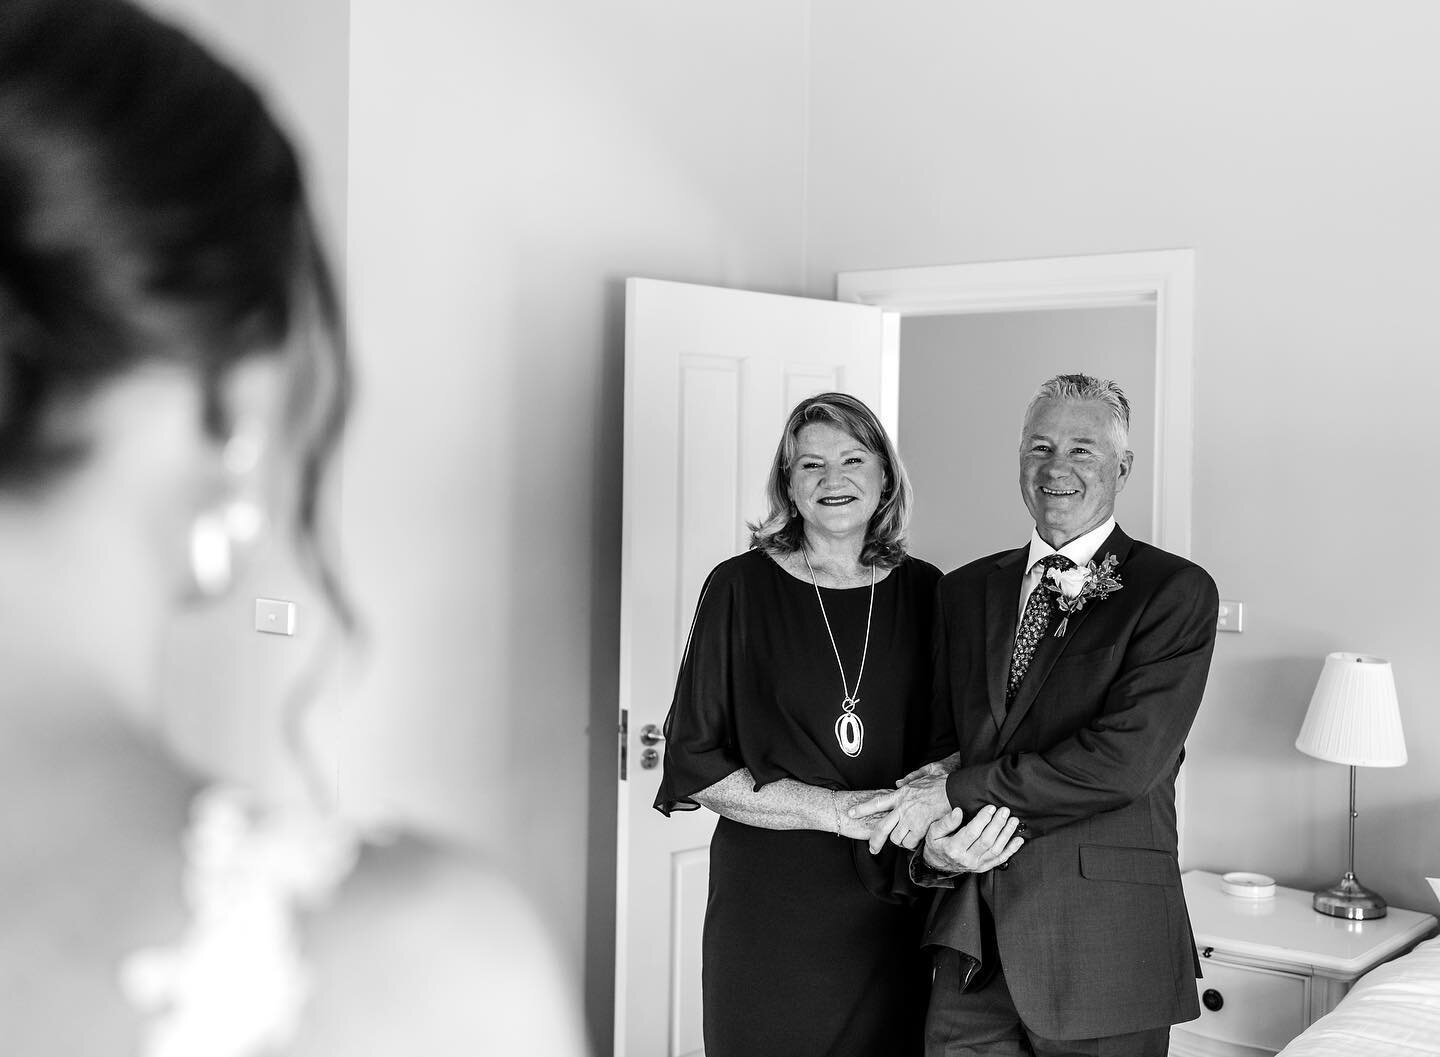 Mum and dad&rsquo;s reaction to seeing Gretta in her wedding dress 🥰